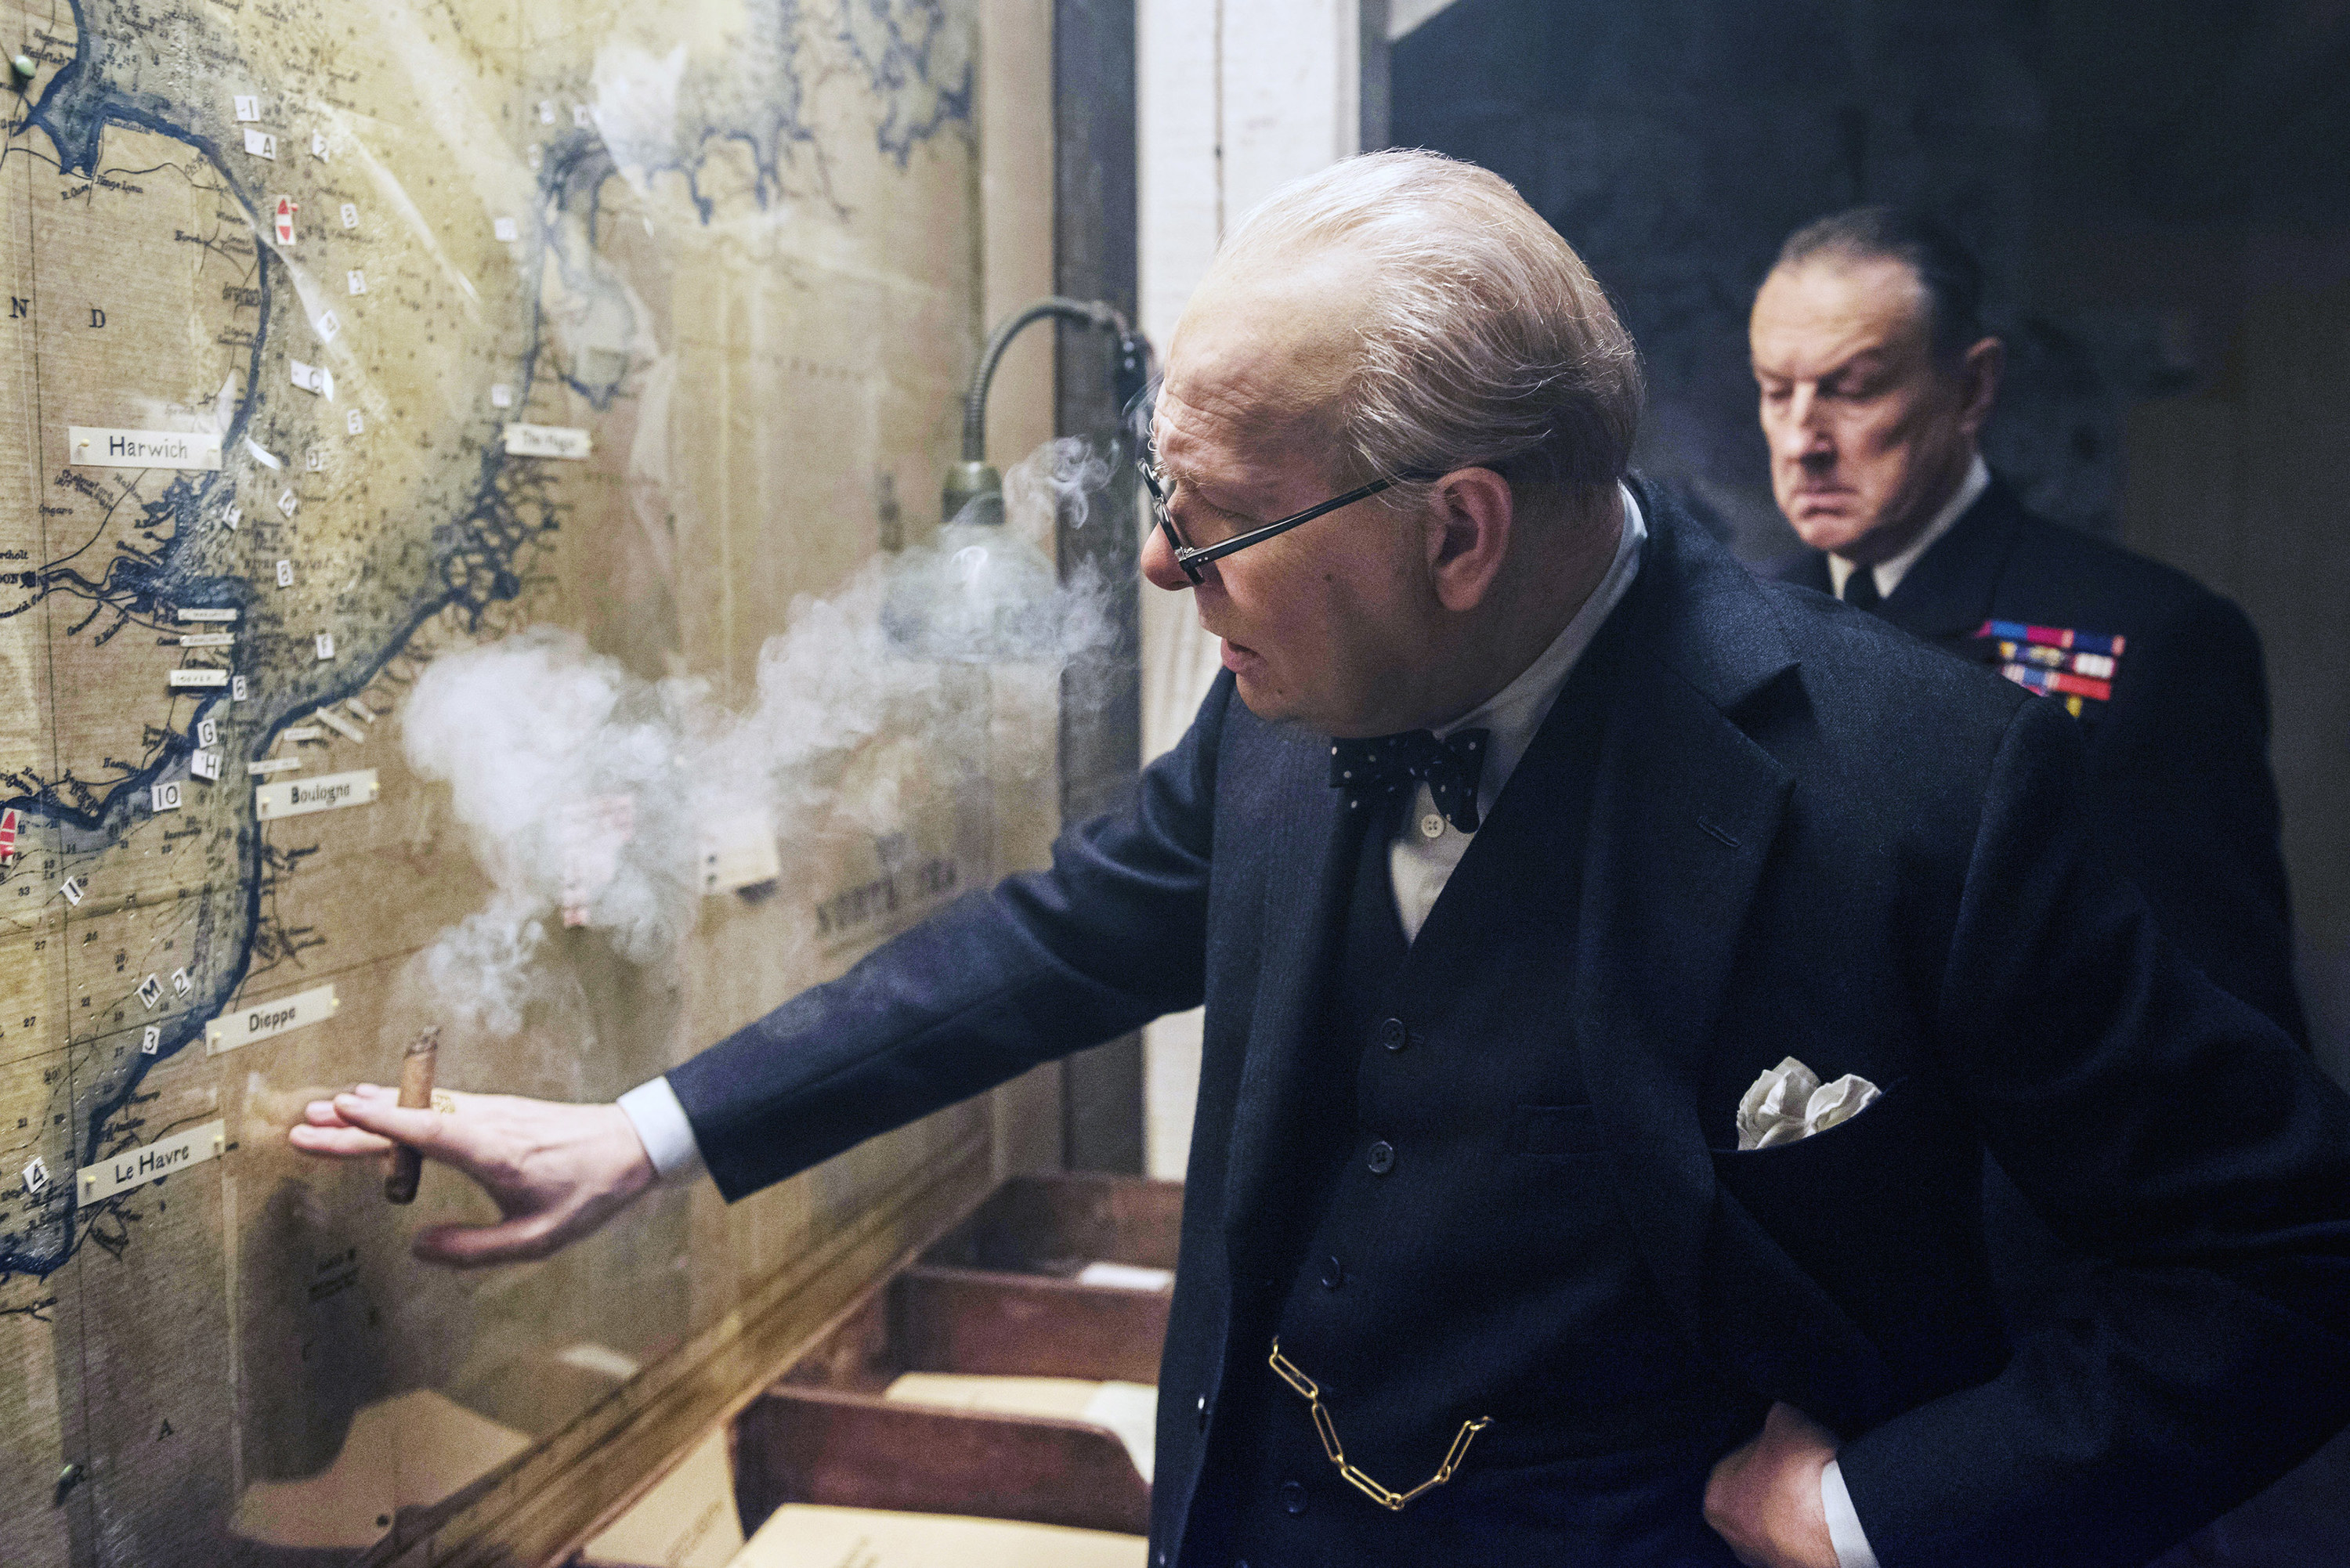 Oldman as Churchill touching a map with a cigar in his hand